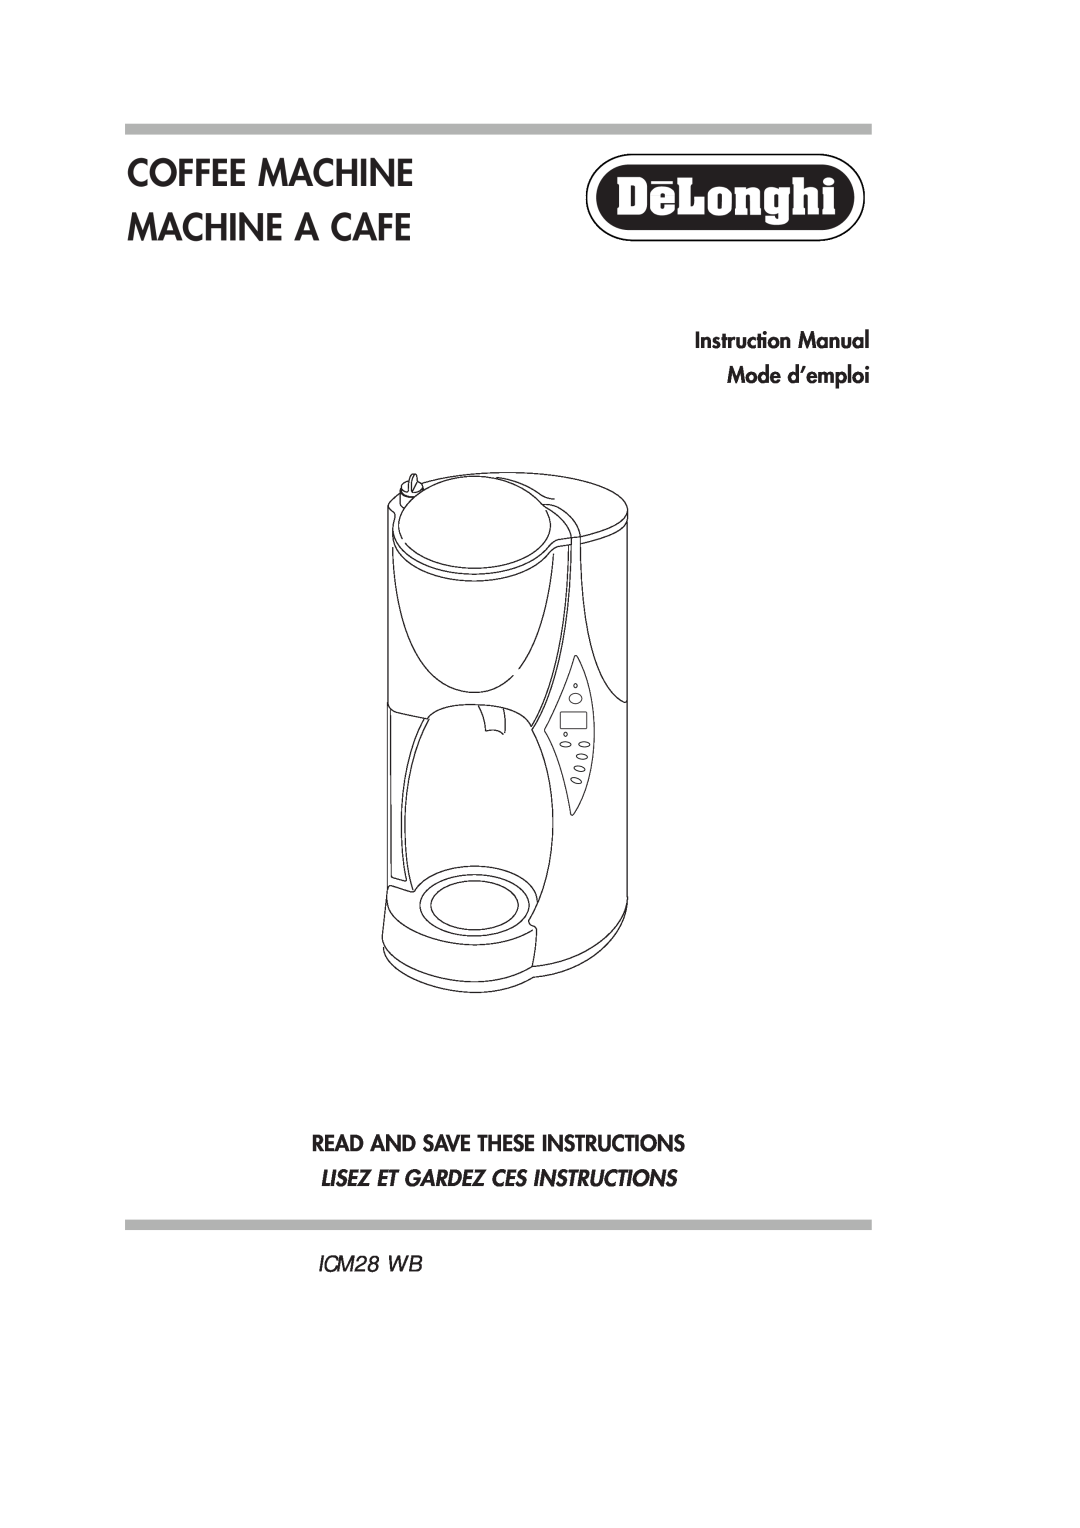 DeLonghi ICM28 WB instruction manual Read And Save These Instructions, Coffee Machine Machine A Cafe 